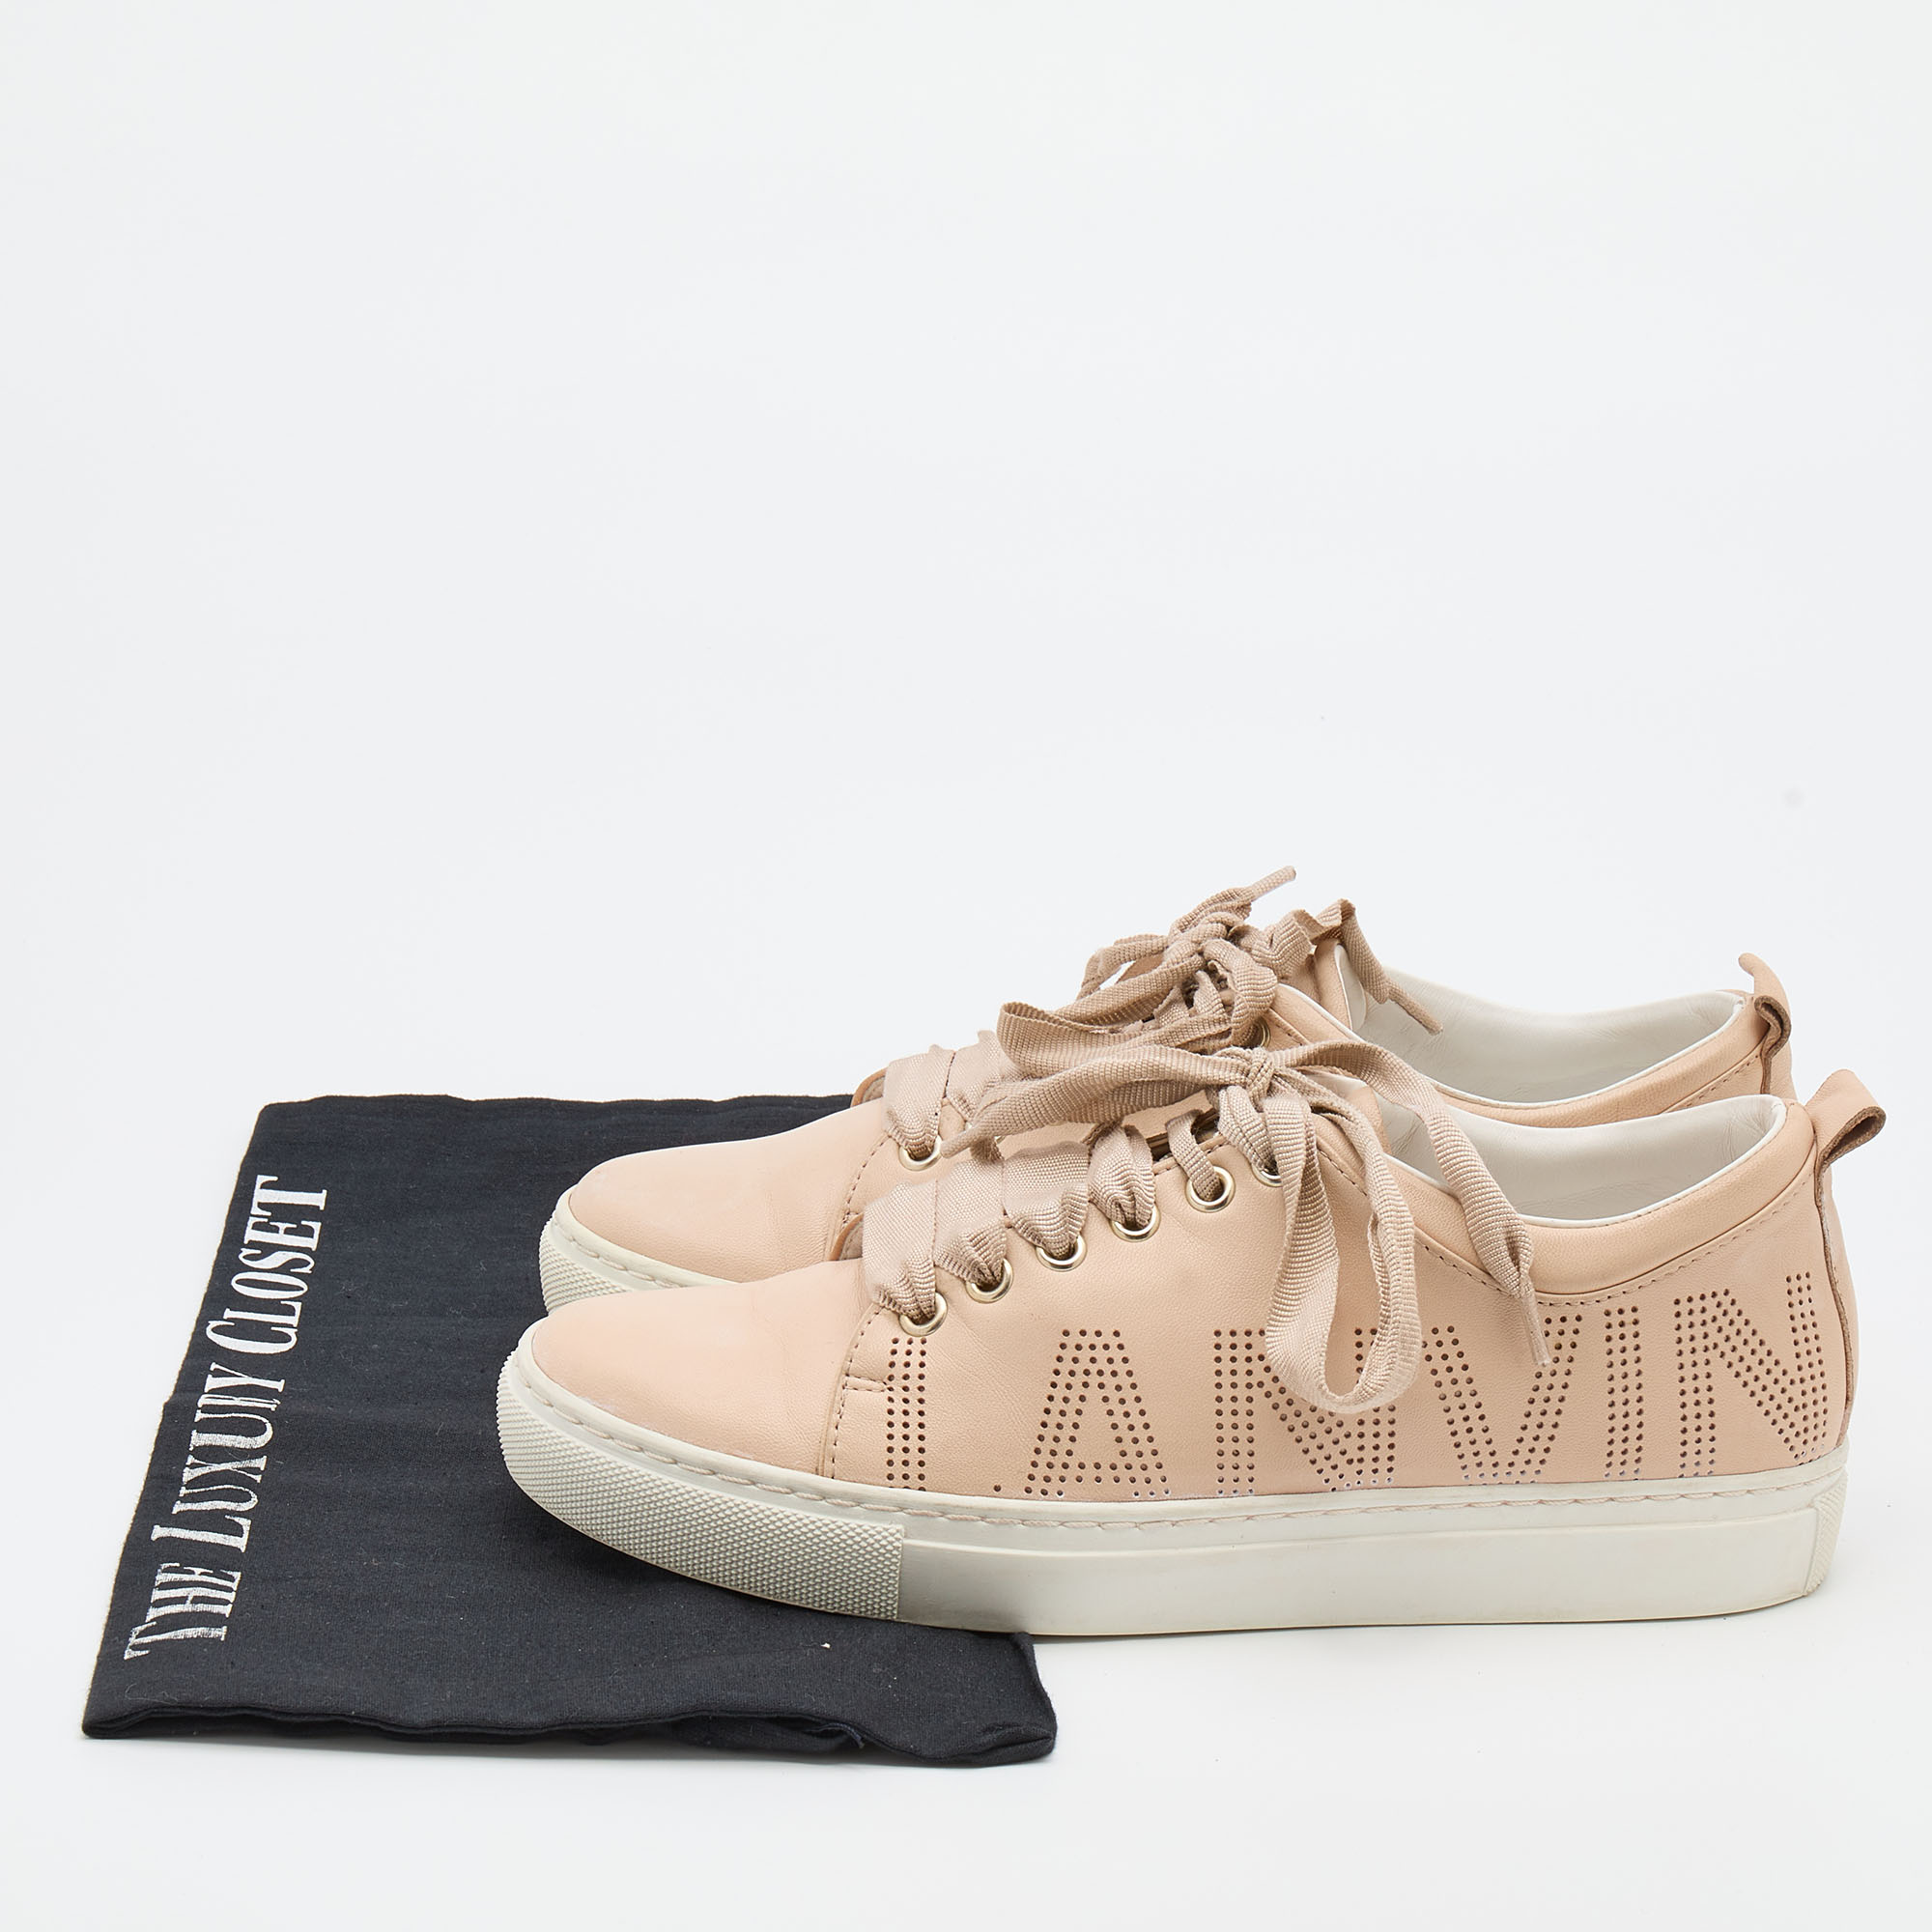 Lanvin Beige Leather Perforated Logo Low Top Sneakers Size 37